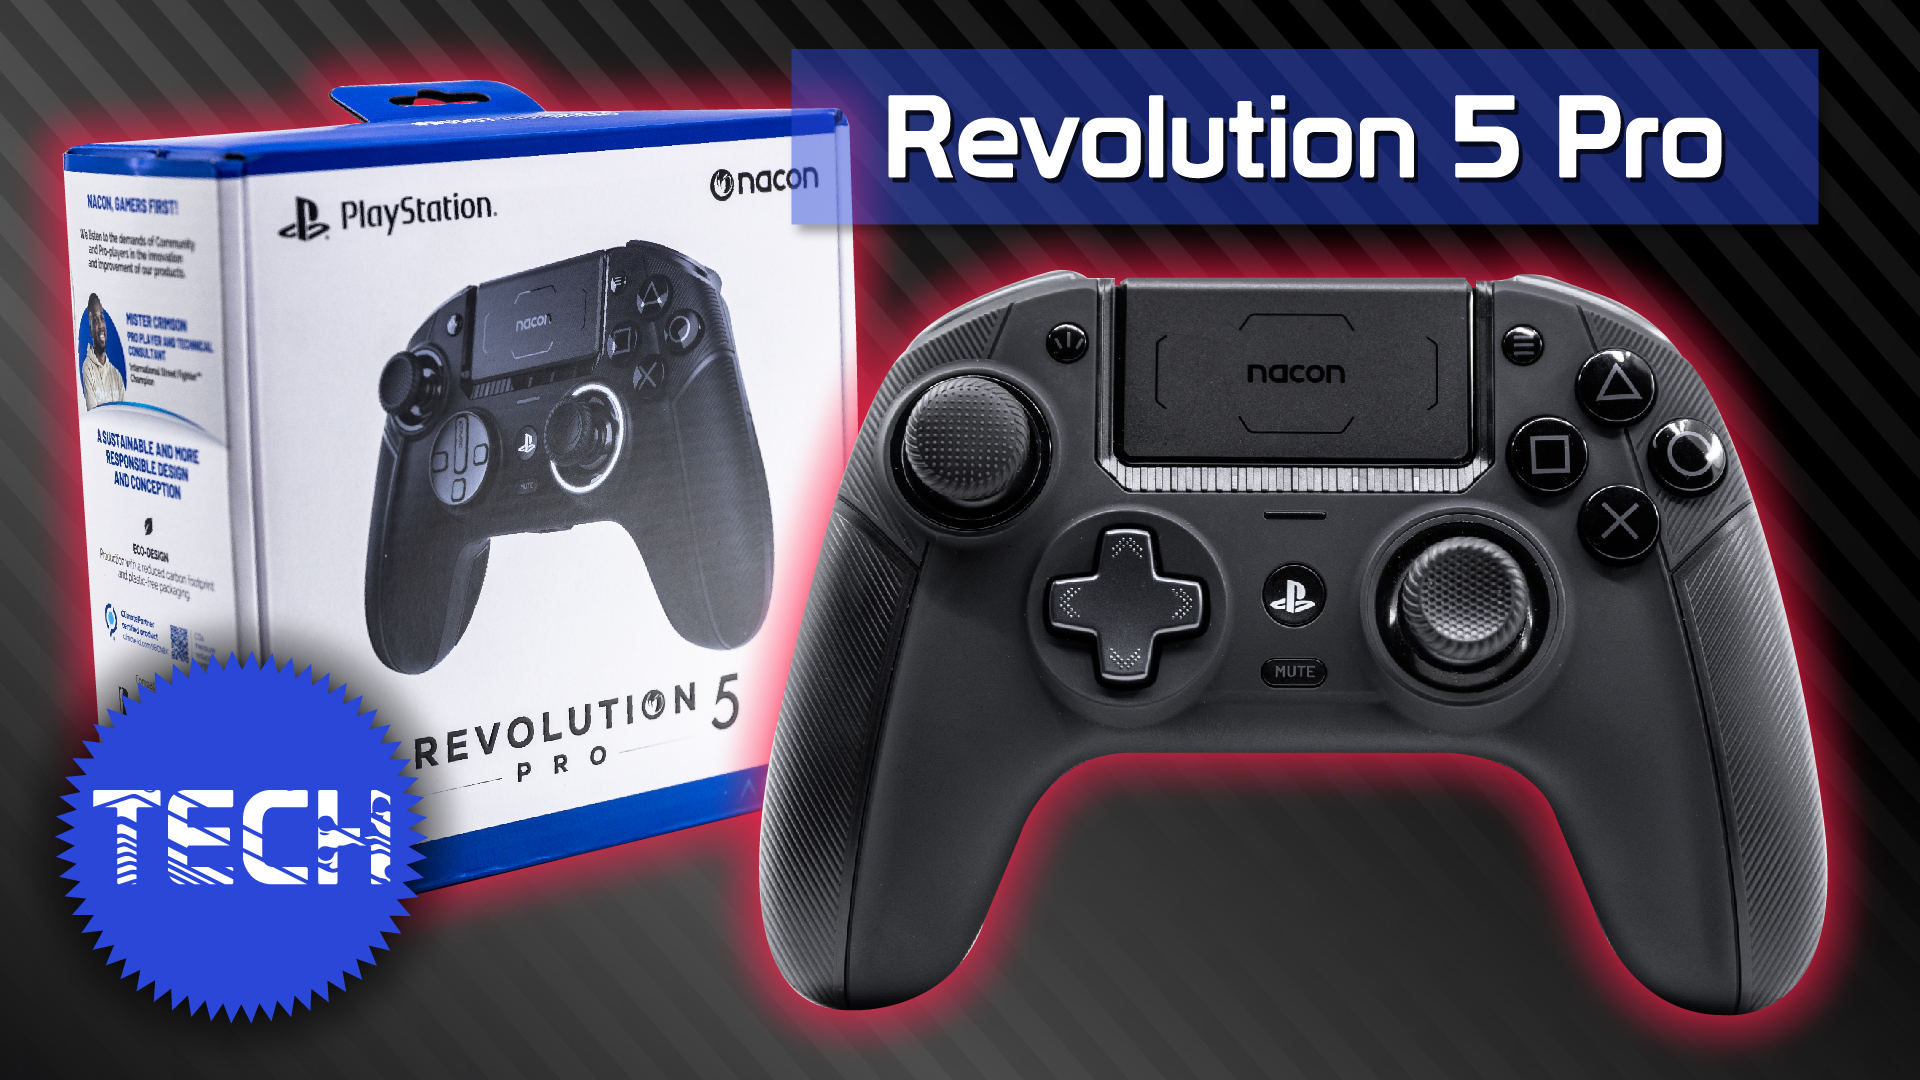 Revolution 5 Pro Nacon Controller Review – A Highly Unique Option In The Device Space, But at What Cost?